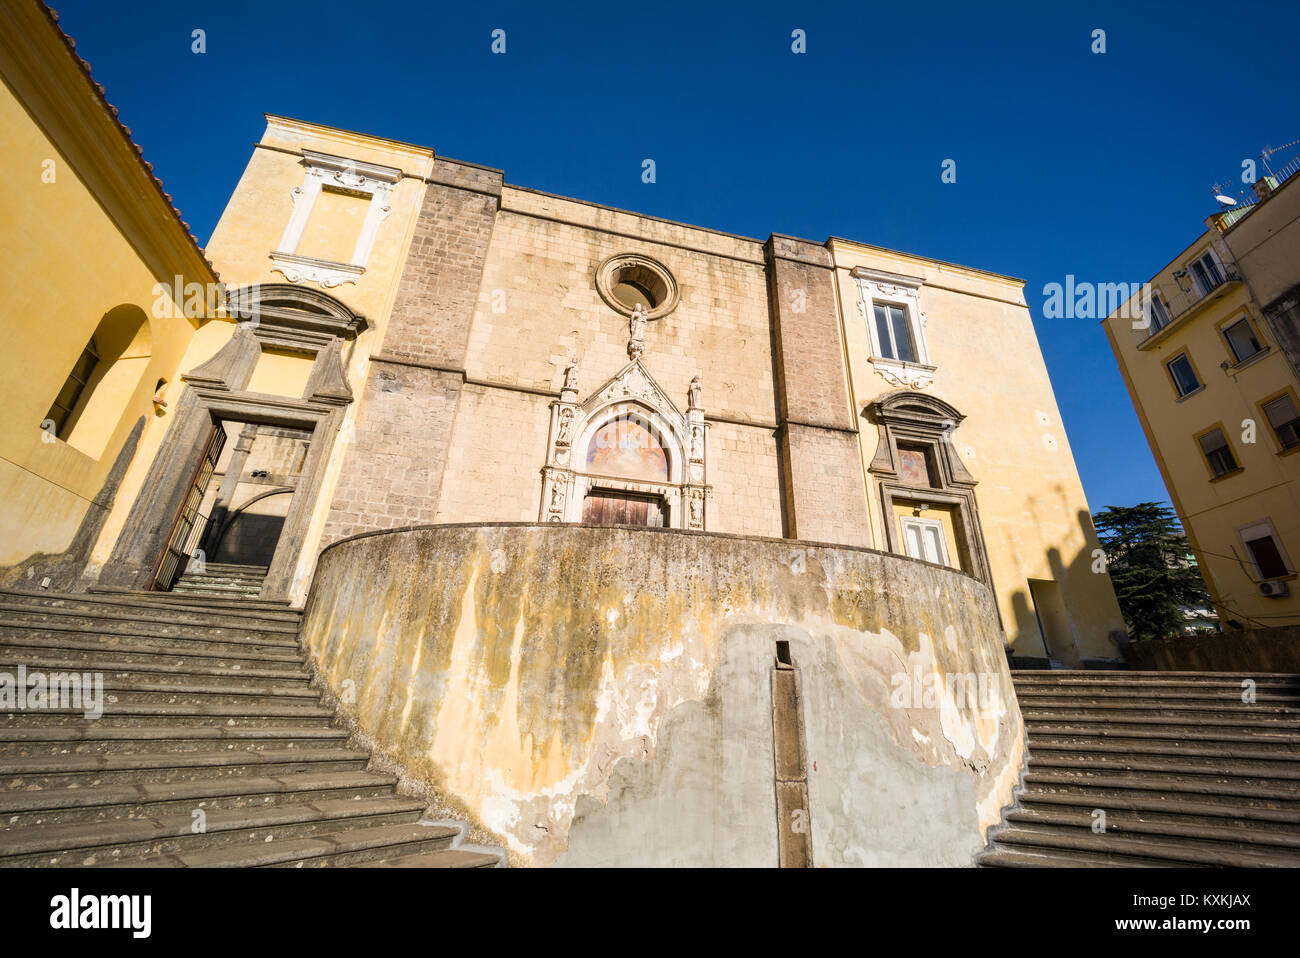 Naples. Italy. The 15th century church of San Giovanni a Carbonara, and the double stairway by Ferdinando Sanfelice, 1708. Stock Photo